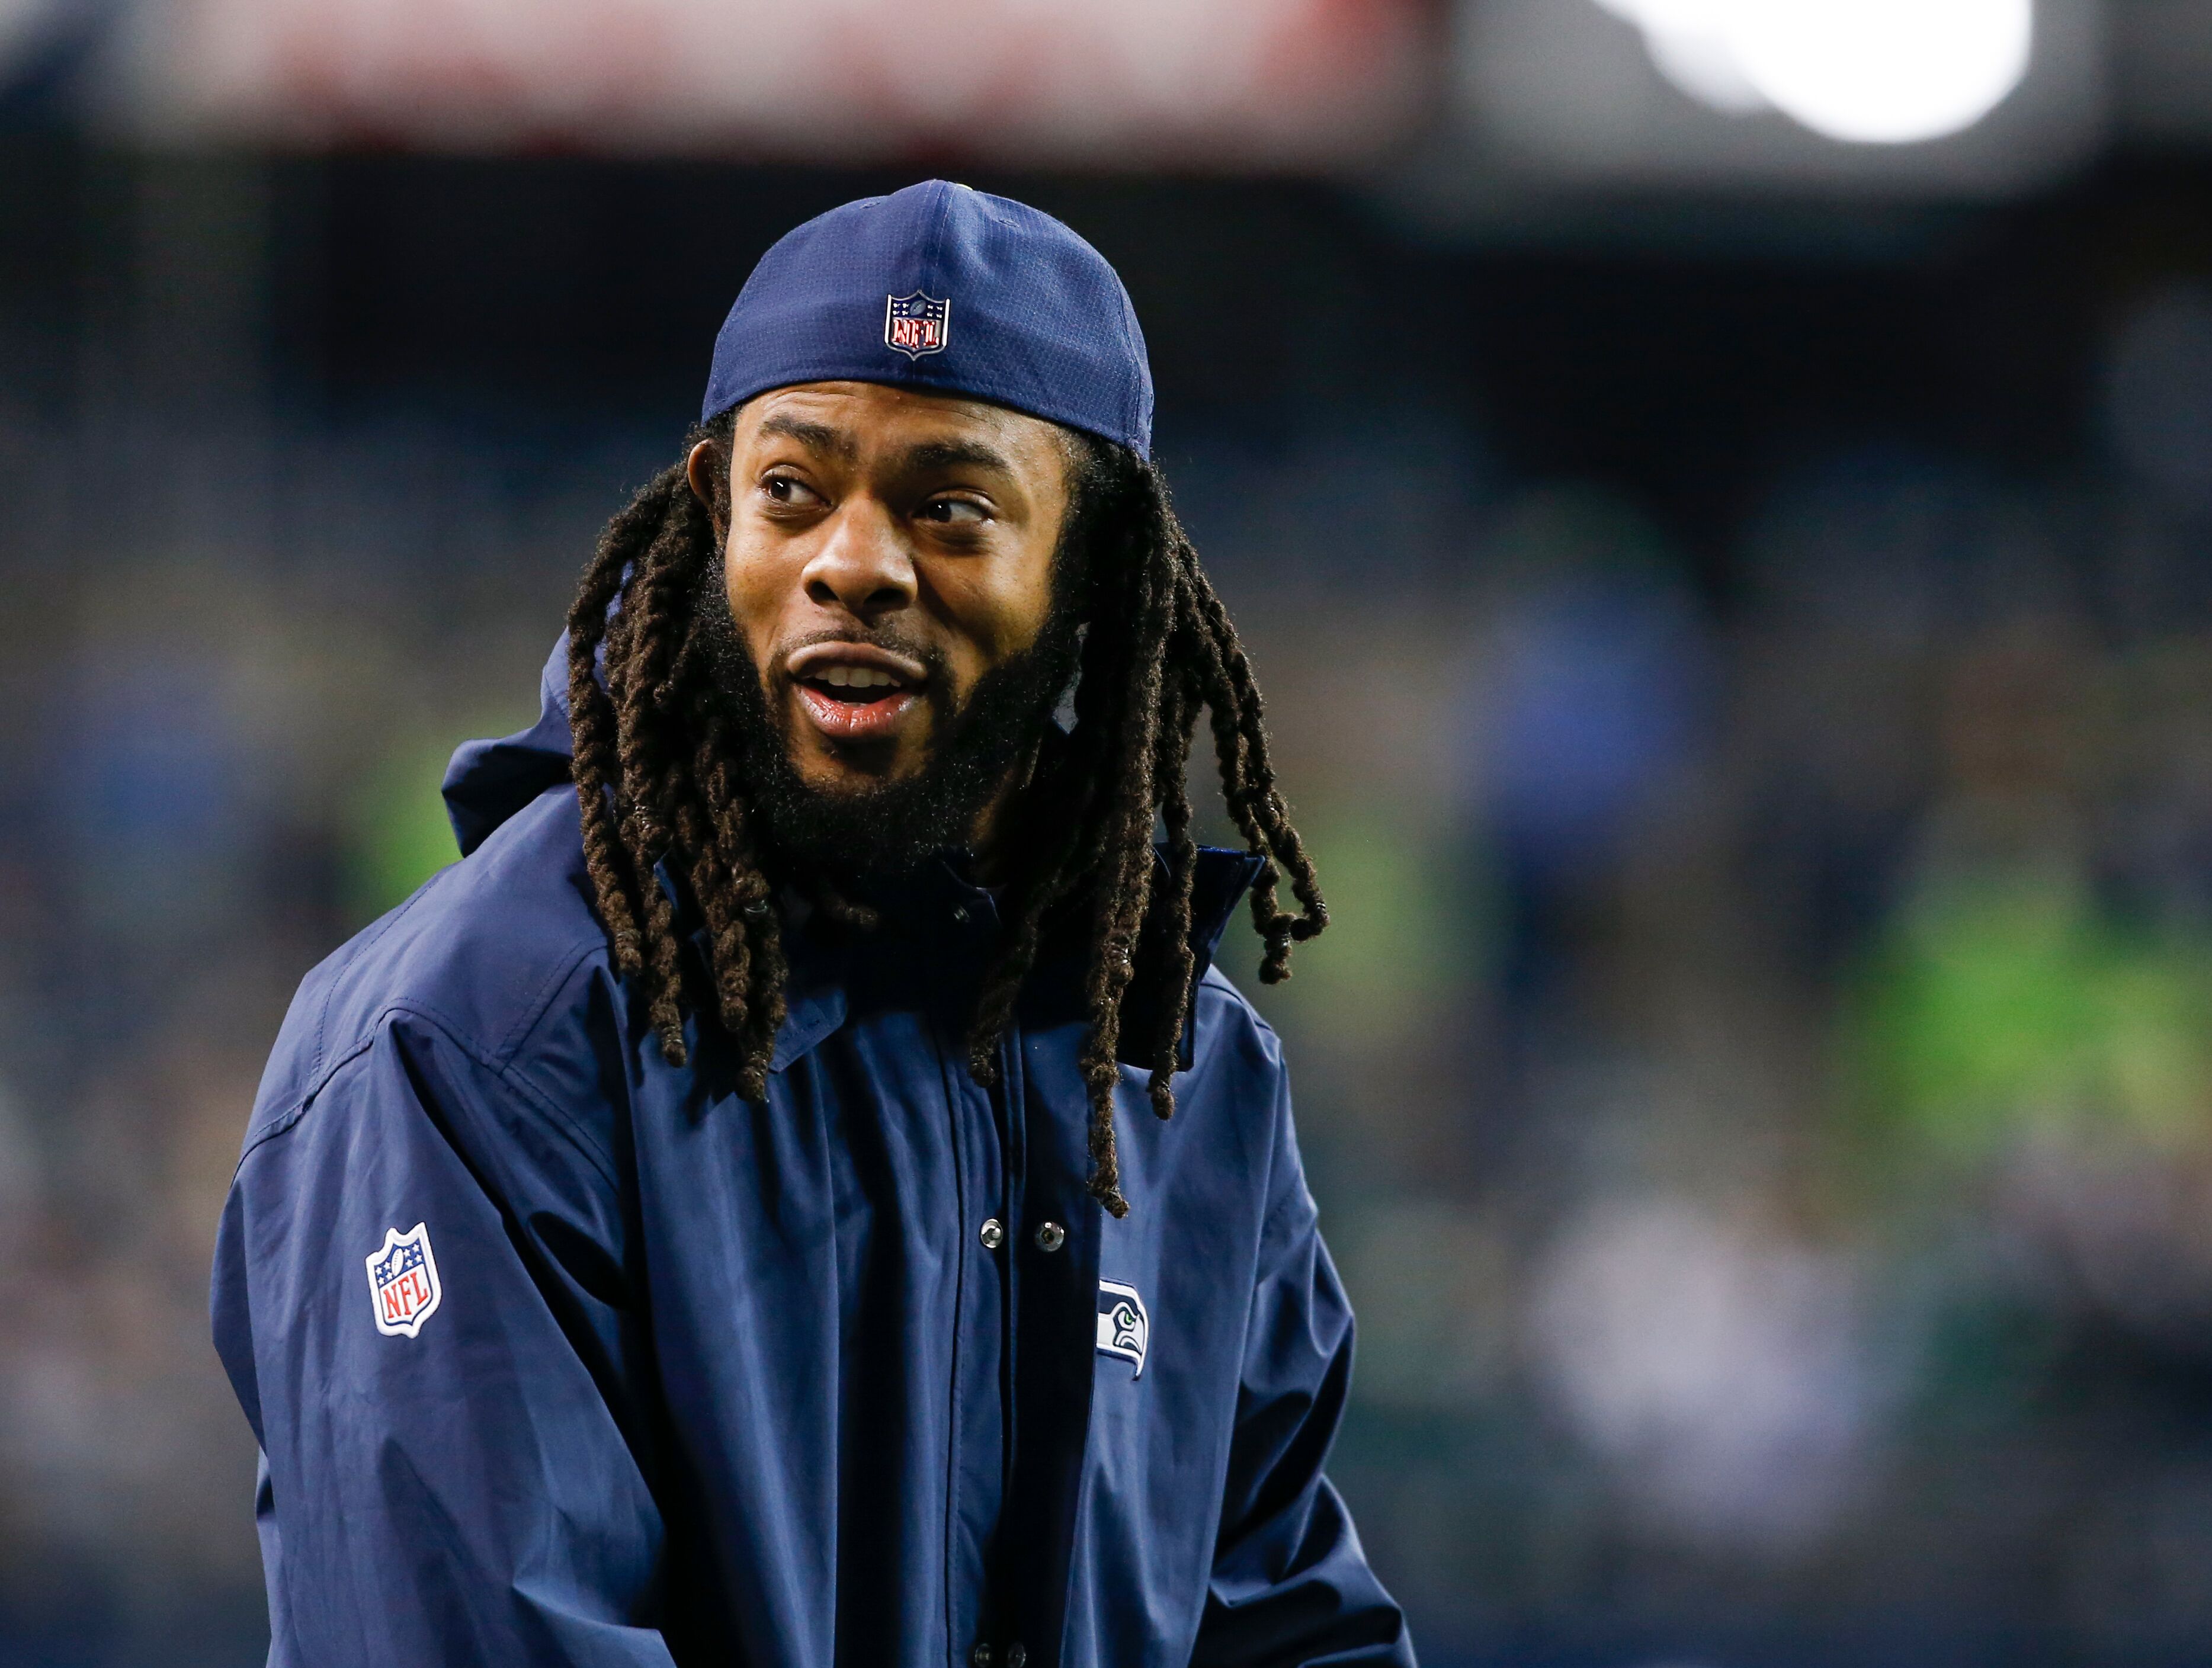 Cornerback Richard Sherman smiling from the sidelines before the Seattle Seahawks game against the Philadelphia Eagles at CenturyLink Field in Seattle, Washington | Photo: Getty Images